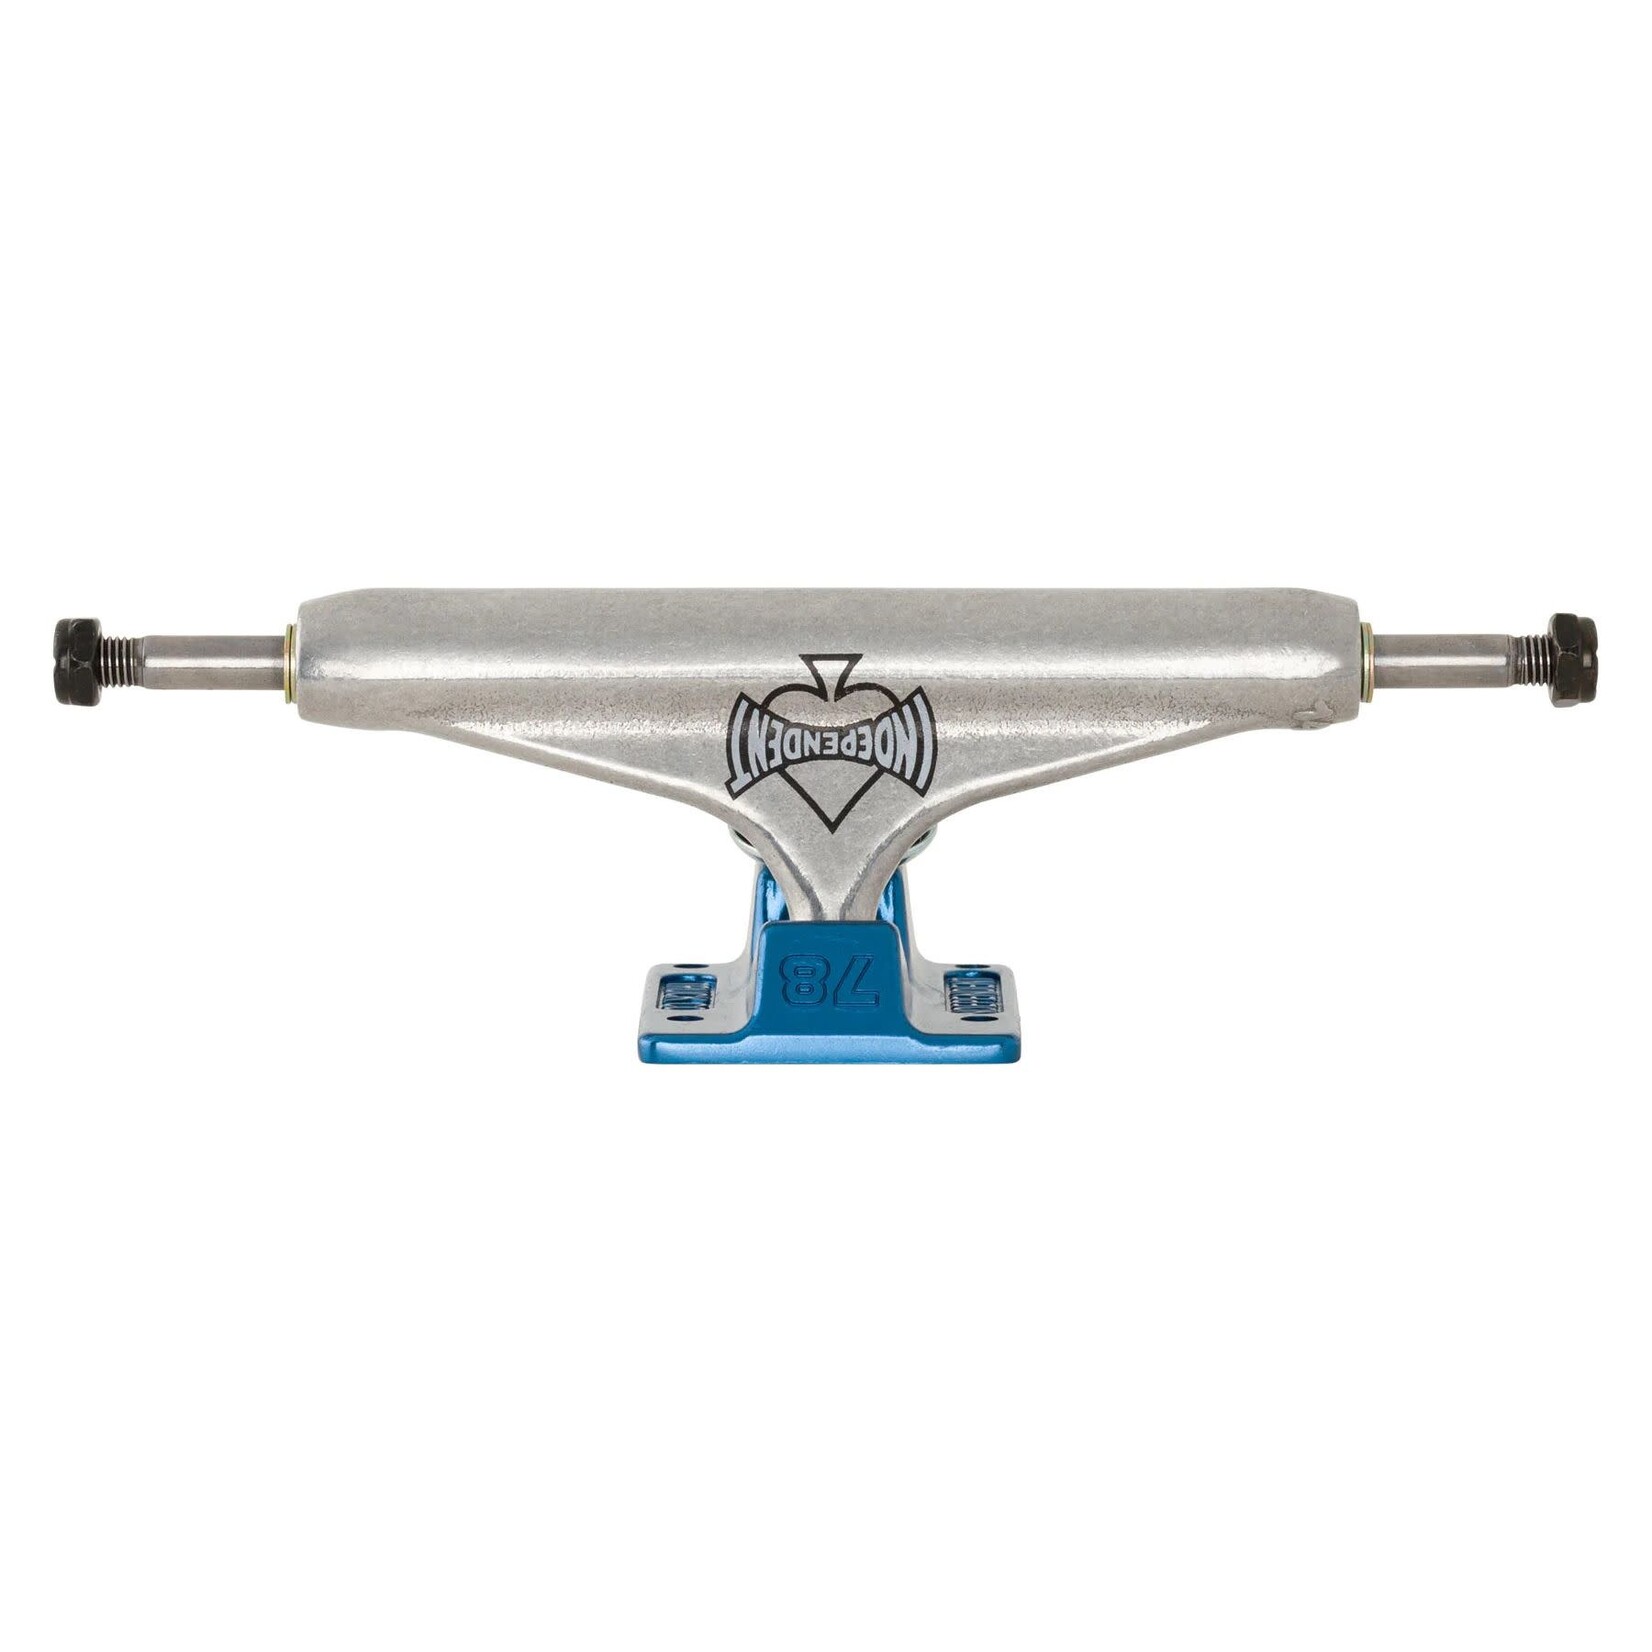 Independent Independent - Forged Hollow - 78 Trucks - Ano Blue - 149mm